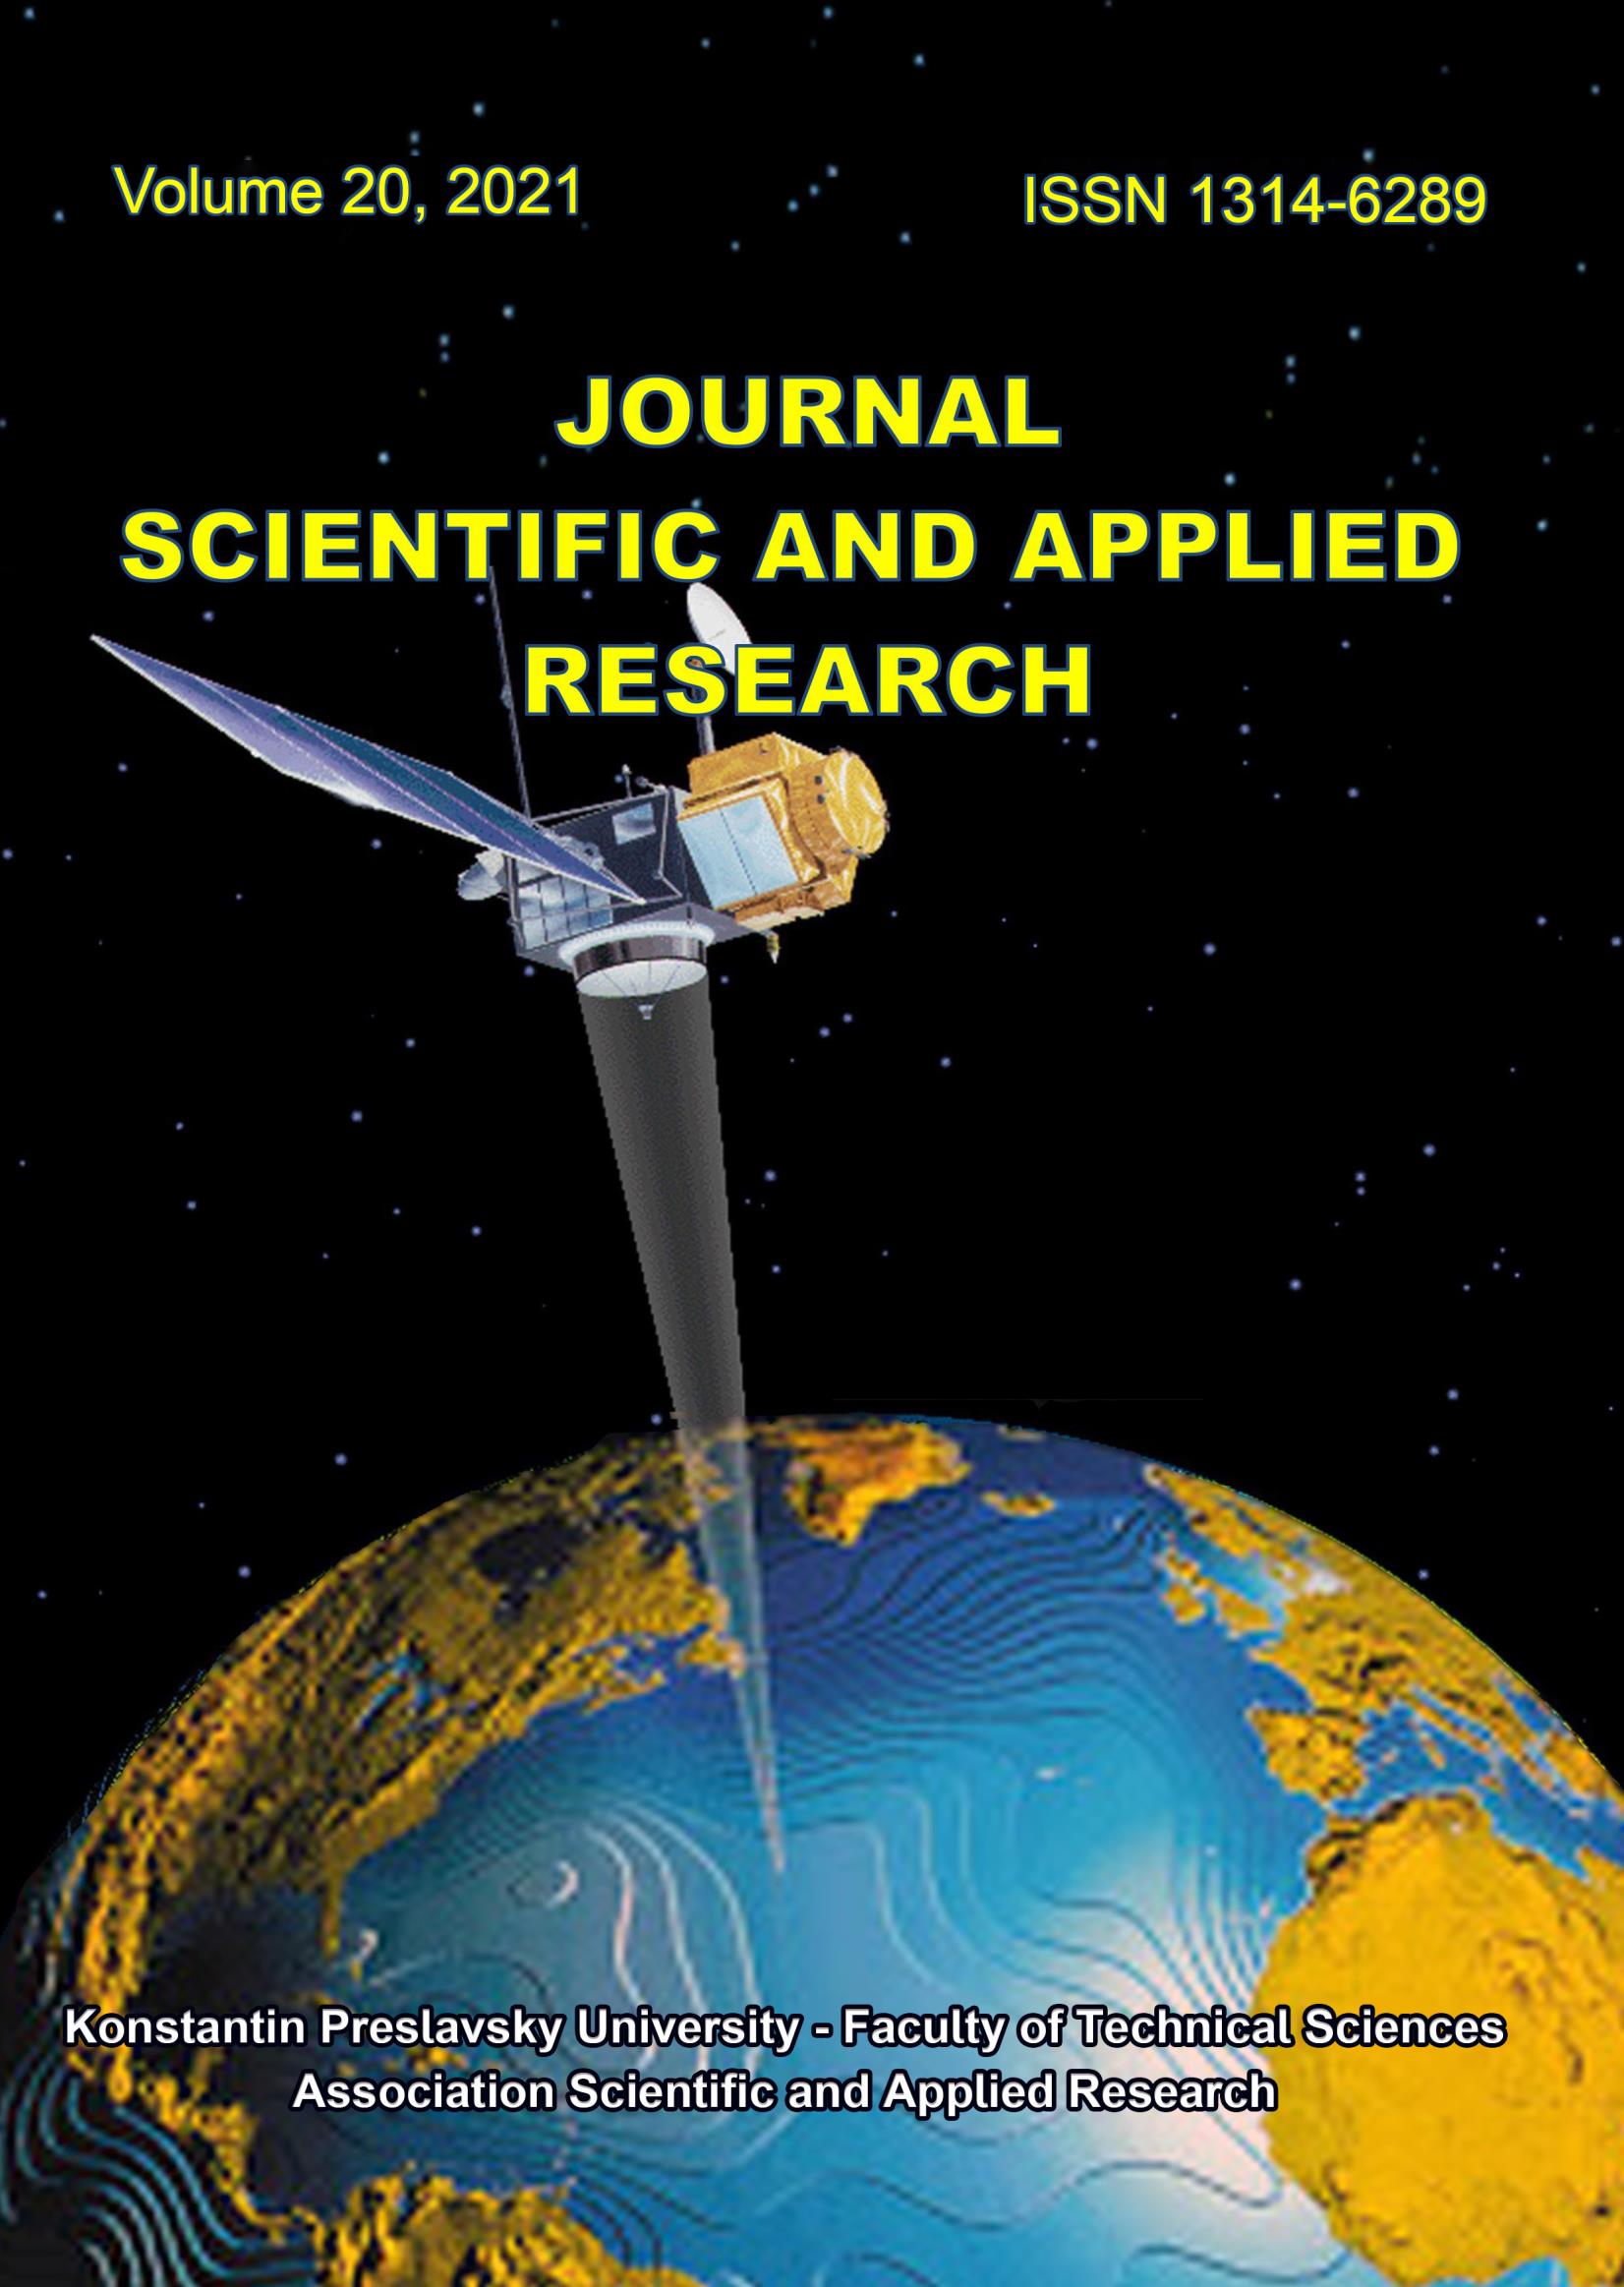 					View Vol. 20 No. 1 (2021): Journal Scientific and Applied Research
				